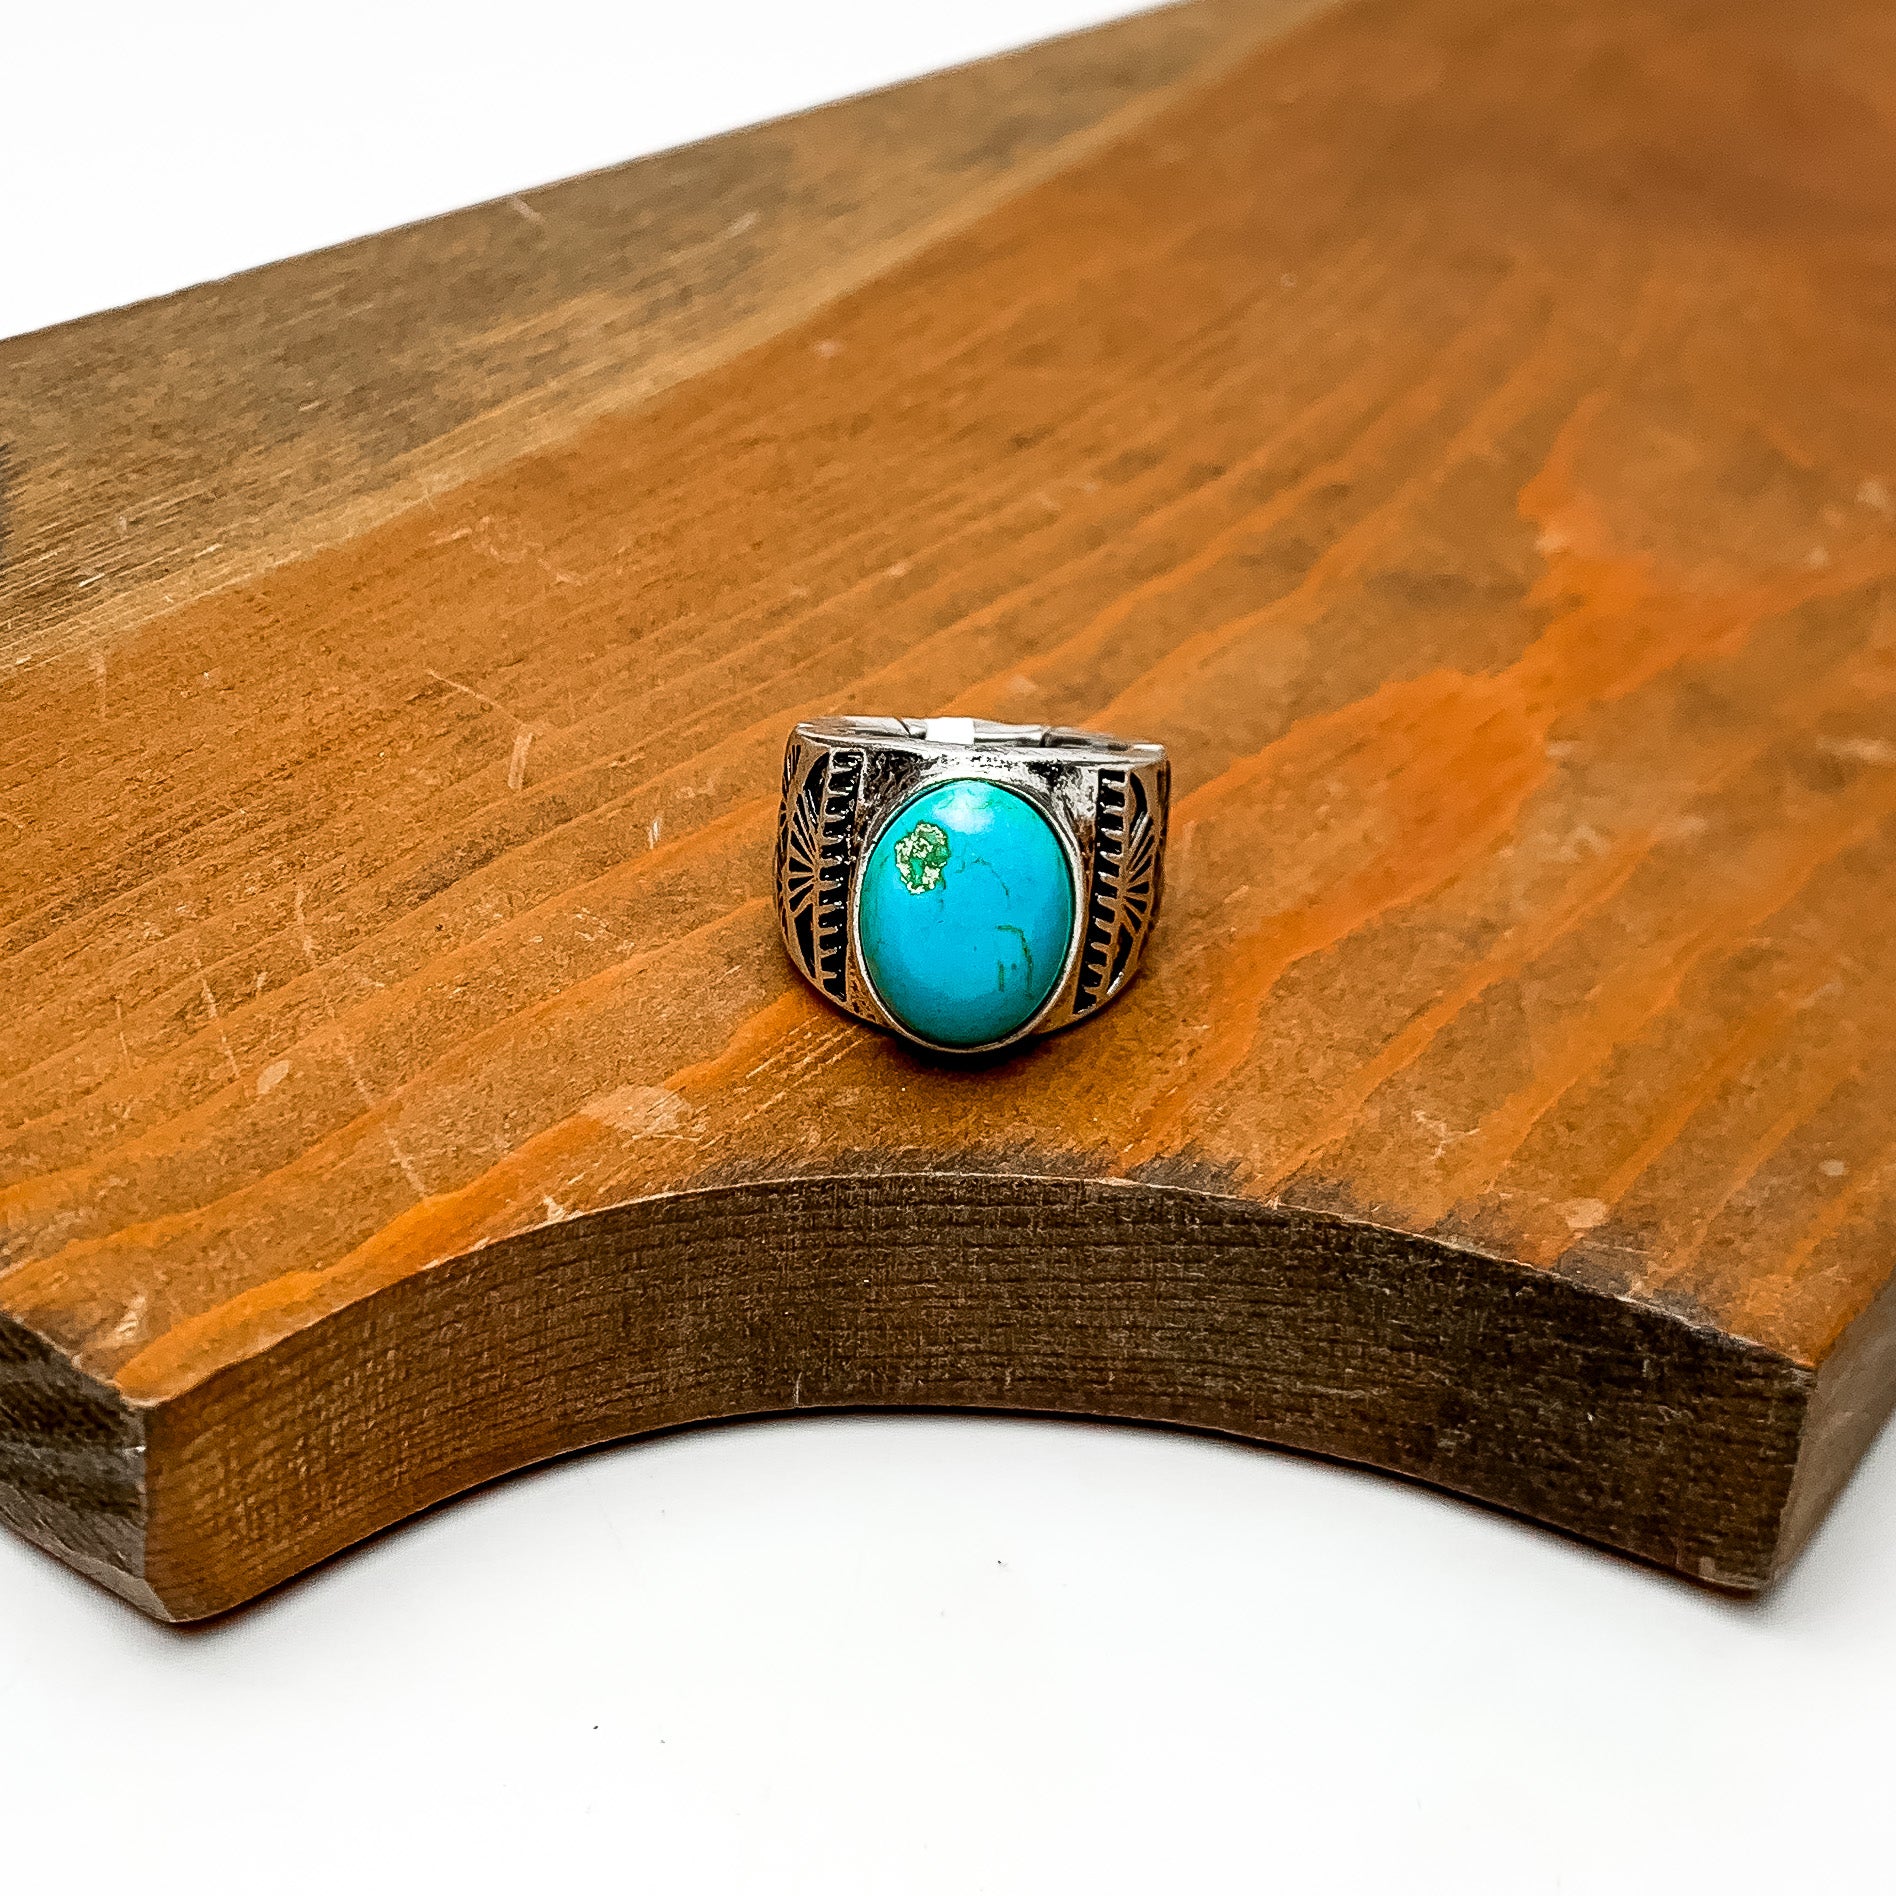 Faux Turquoise Stone Stretchy Ring With Silver Tone Design. This ring is pictured sitting on a wood piece. The background behind the wood is white.